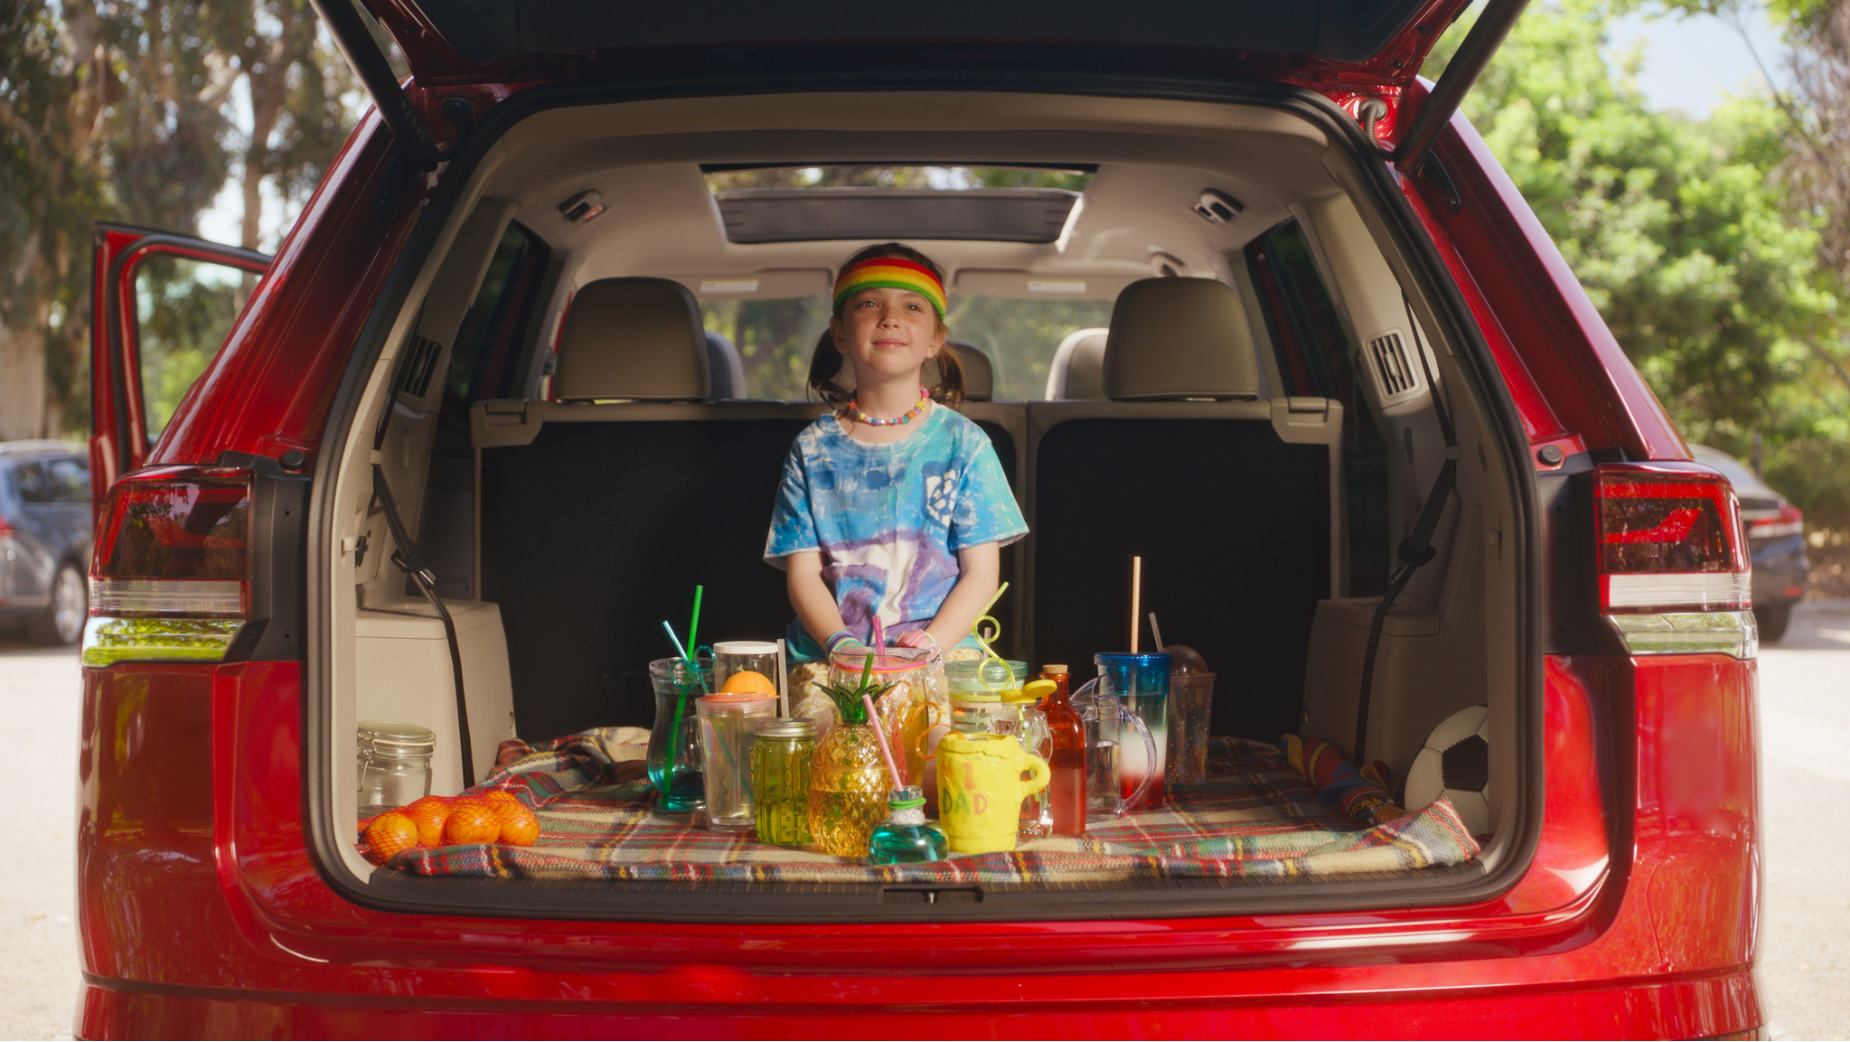 Volkswagen Celebrates Girls Having the Freedom to Be Themselves with Spot Directed by Olivia Wilde | LBBOnline